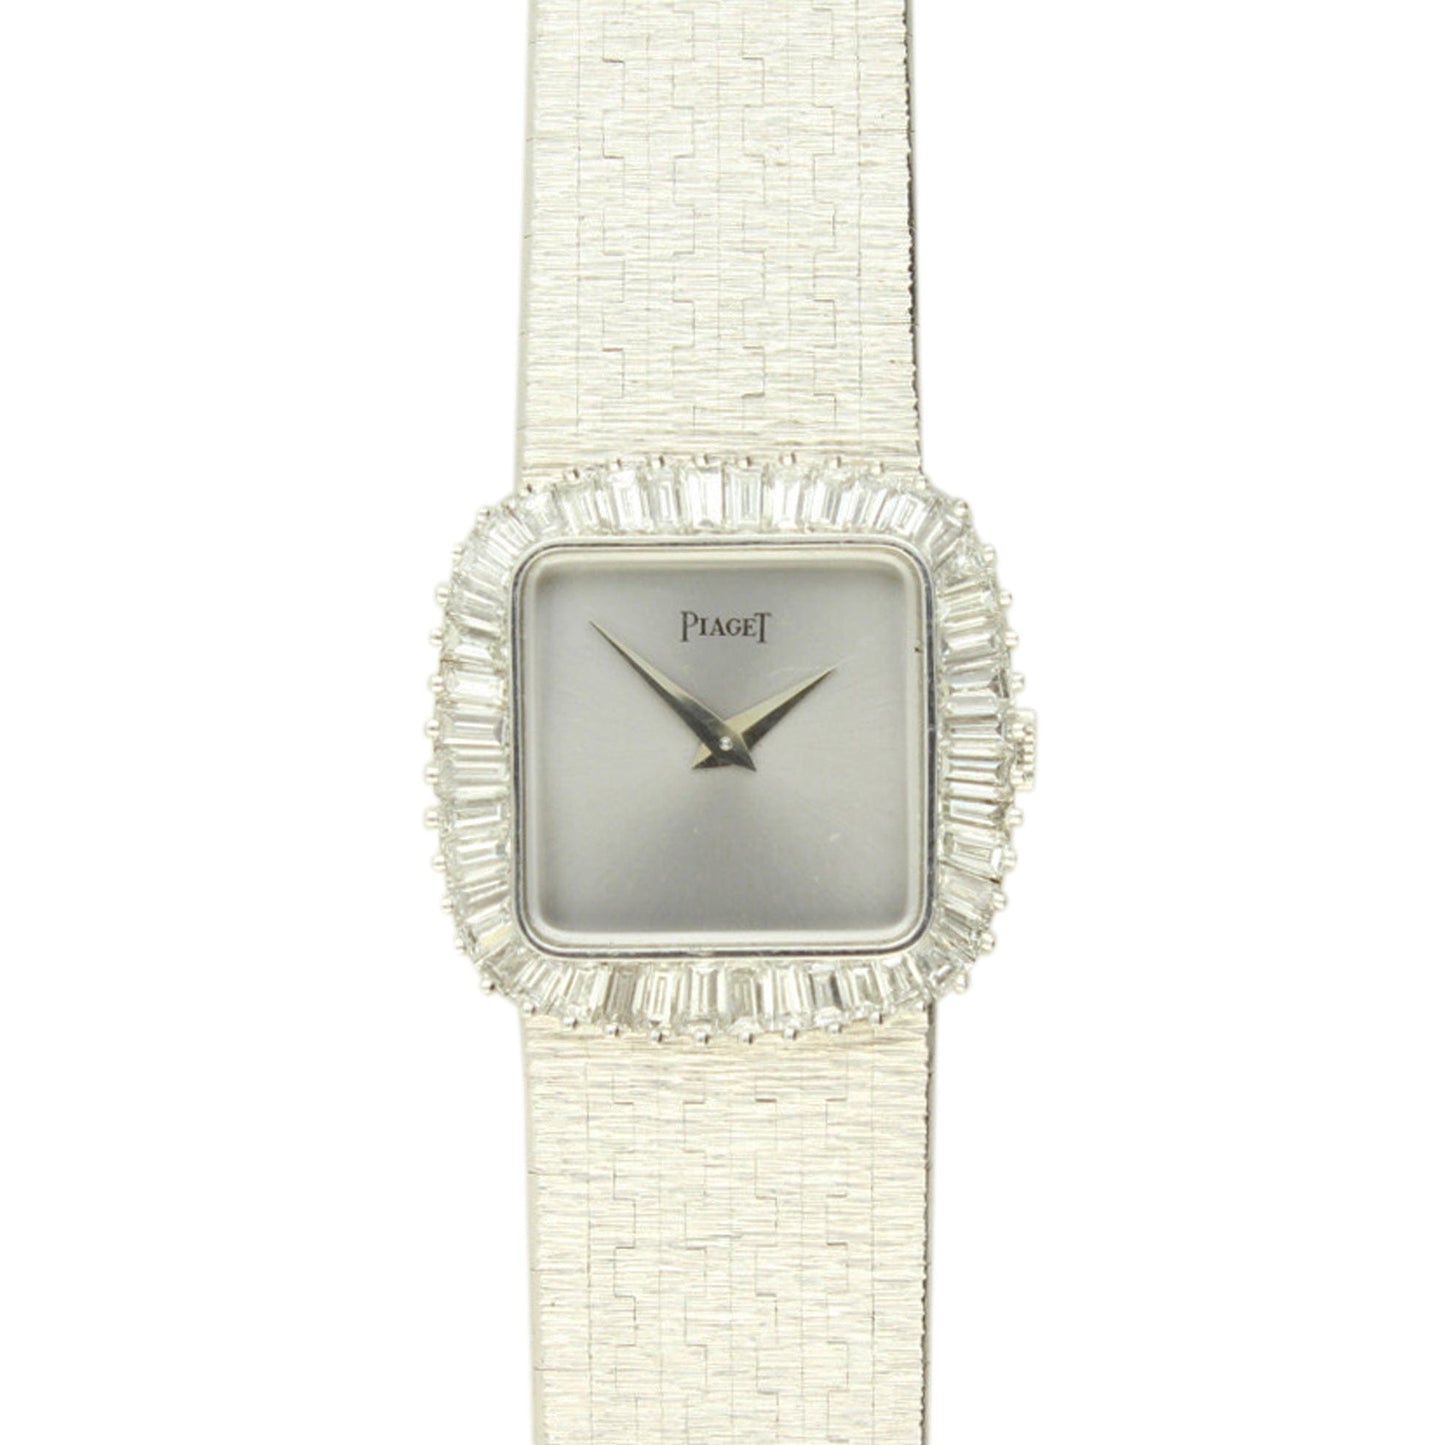 18ct white gold and diamond square cased wristwatch. Made 1970's